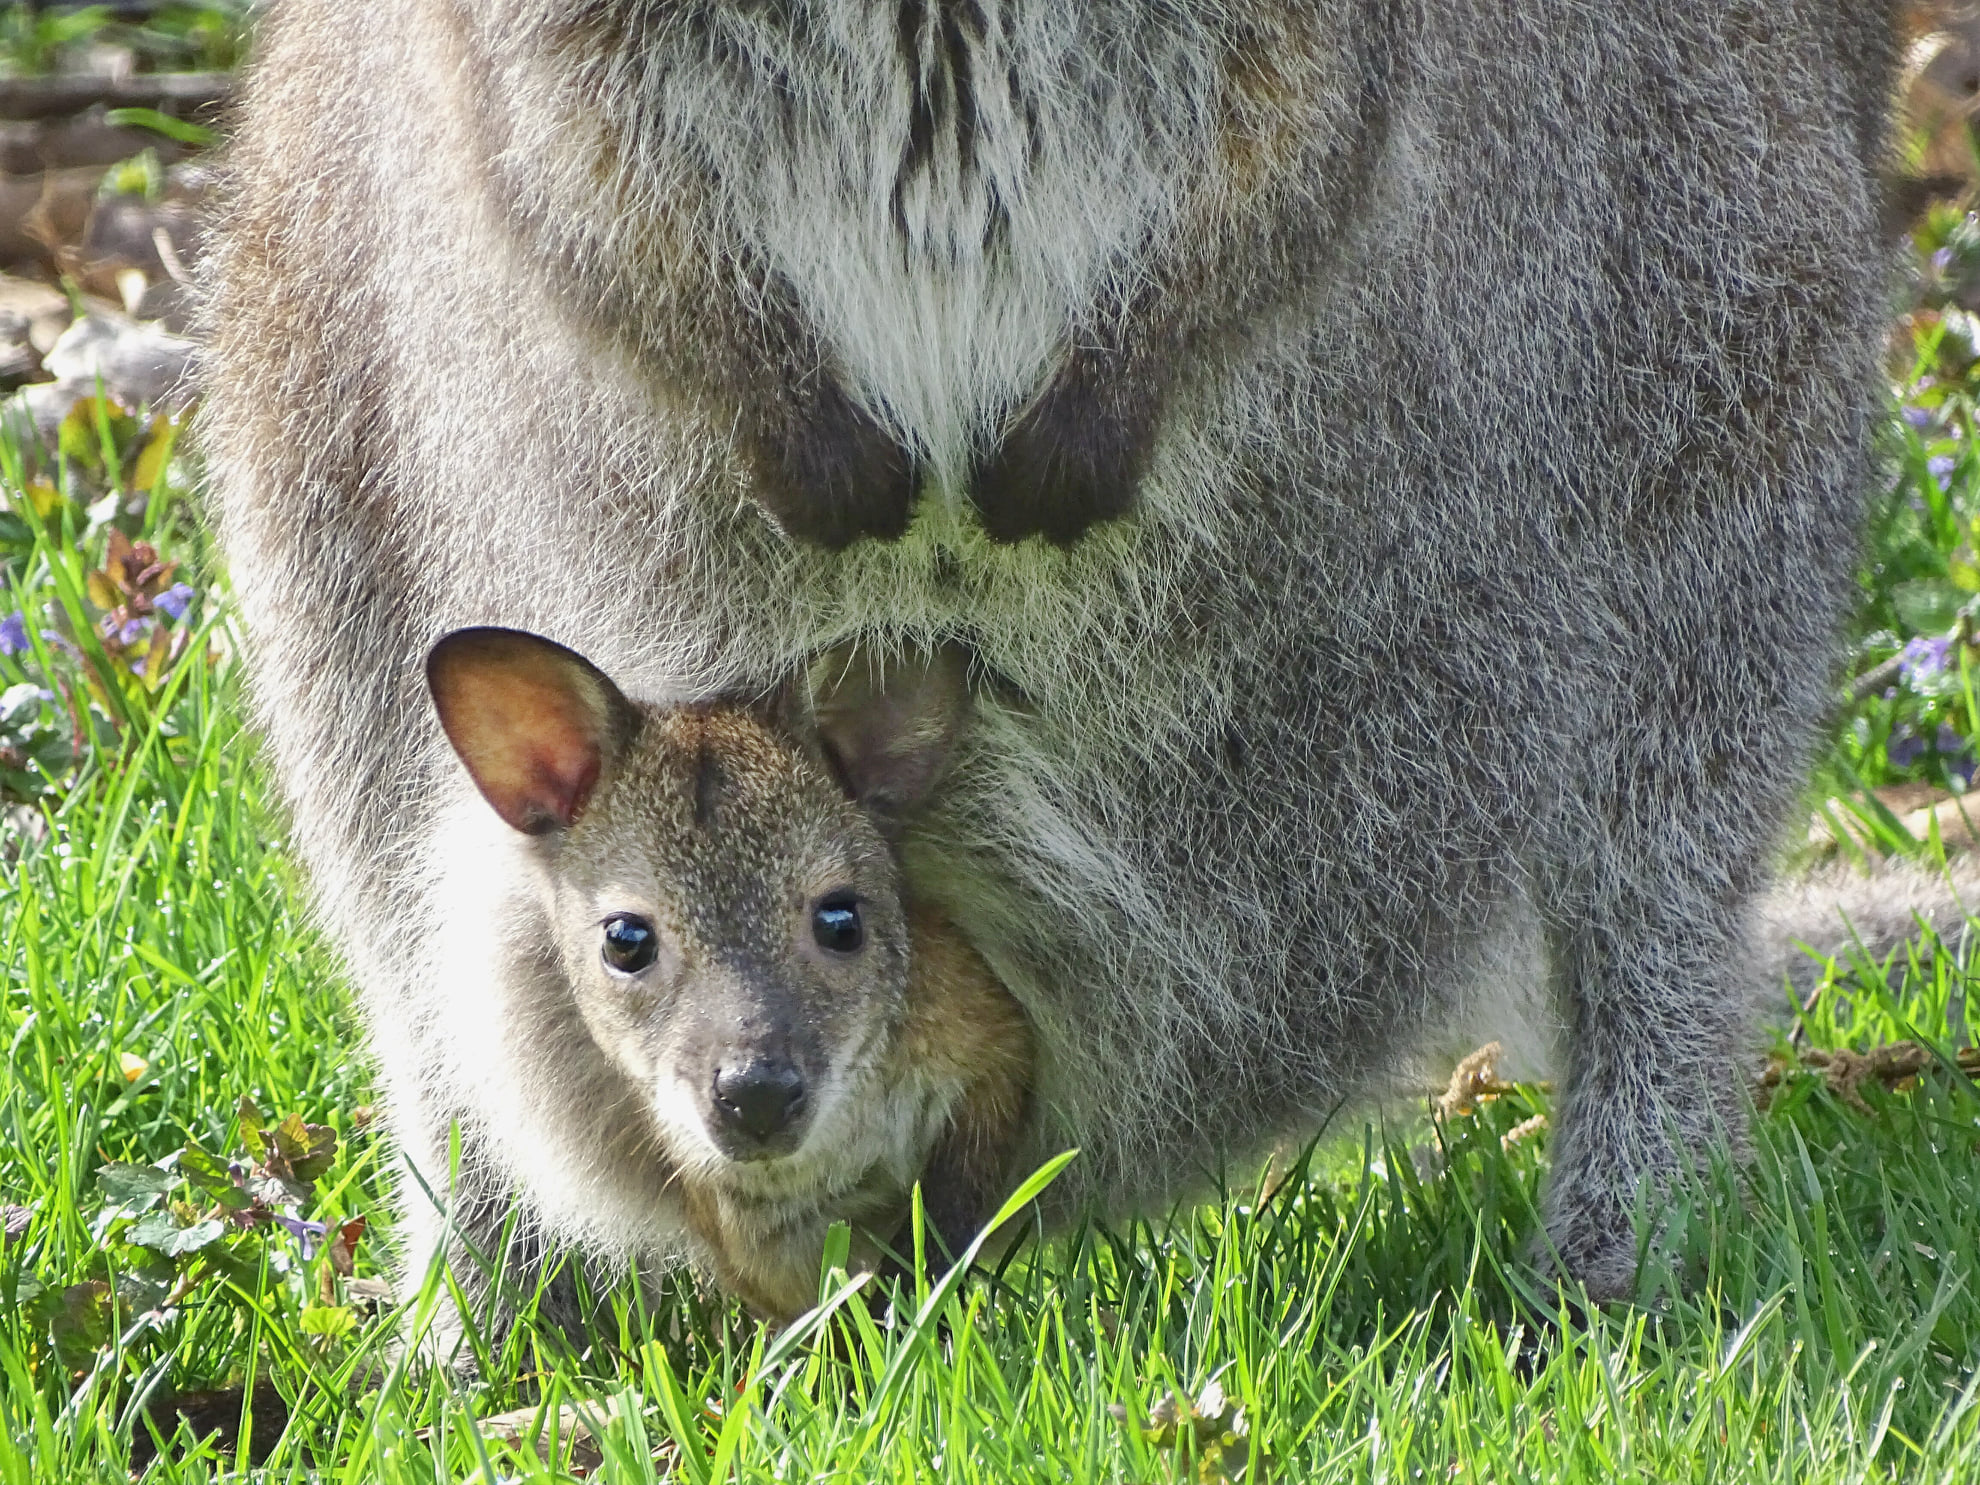 Detroit Zoo calls off search for missing 5-month-old wallaby